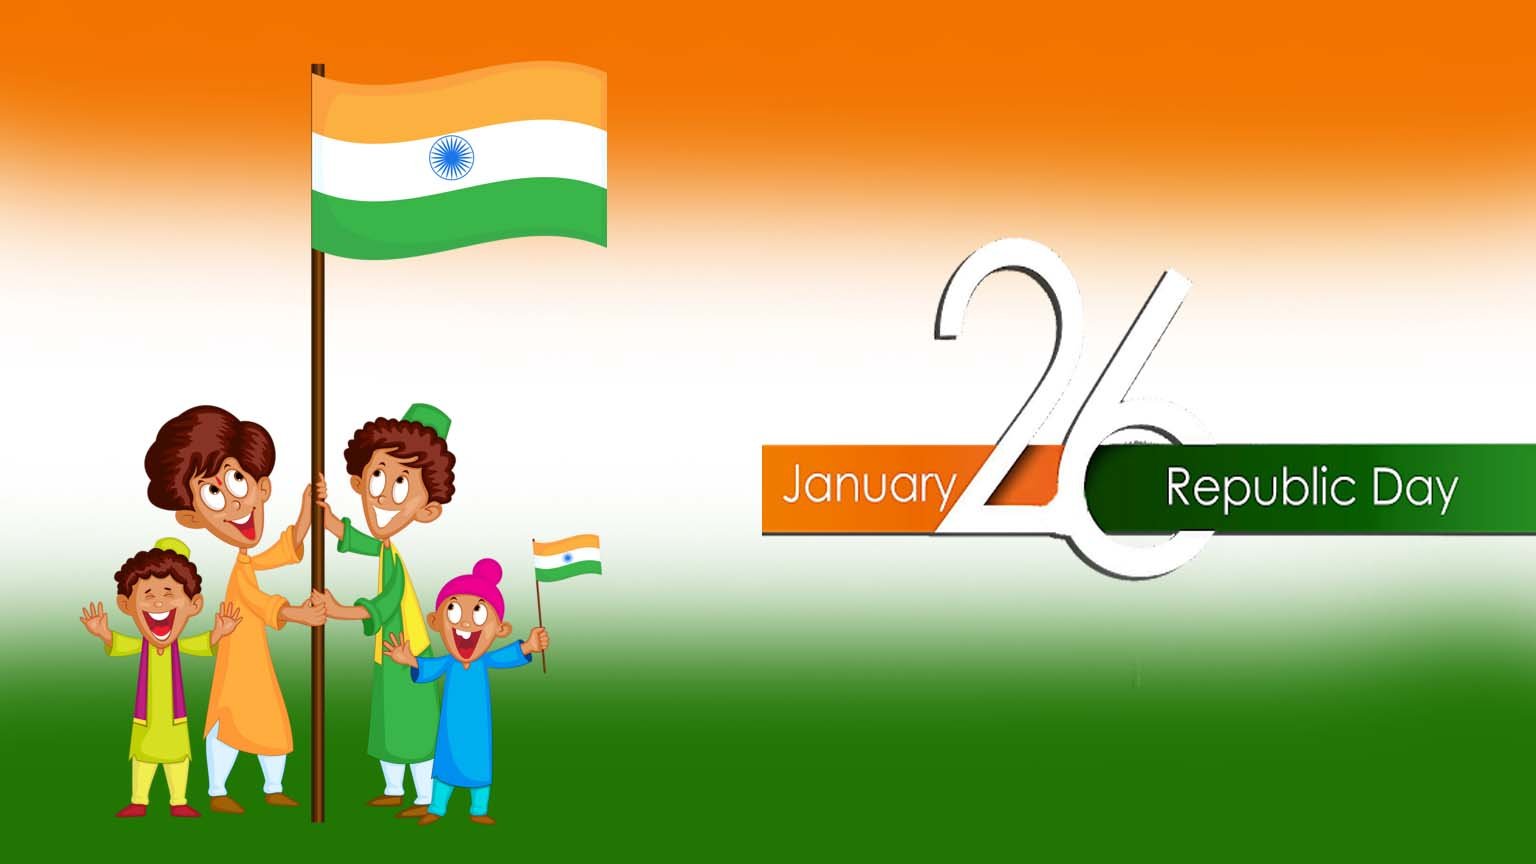 26th January Republic Day A National Festival Of India Making Different